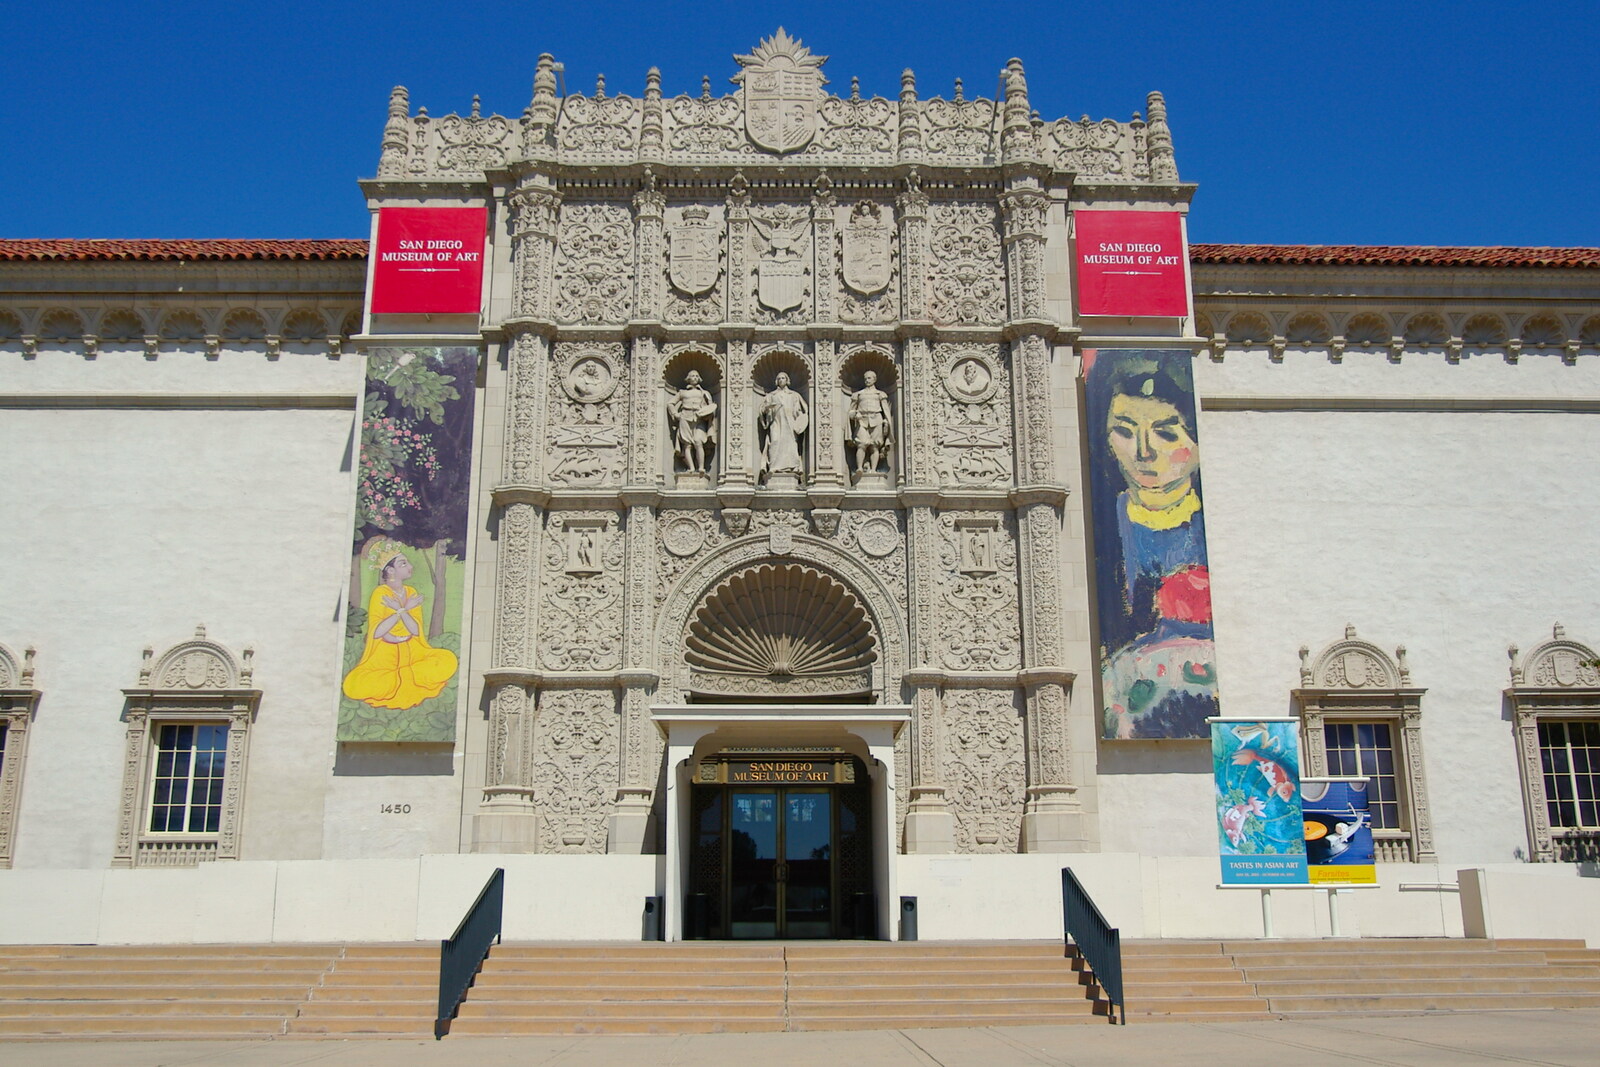 Scenes and People of Balboa Park, San Diego, California - 25th September 2005: The San Diego Museum of Art